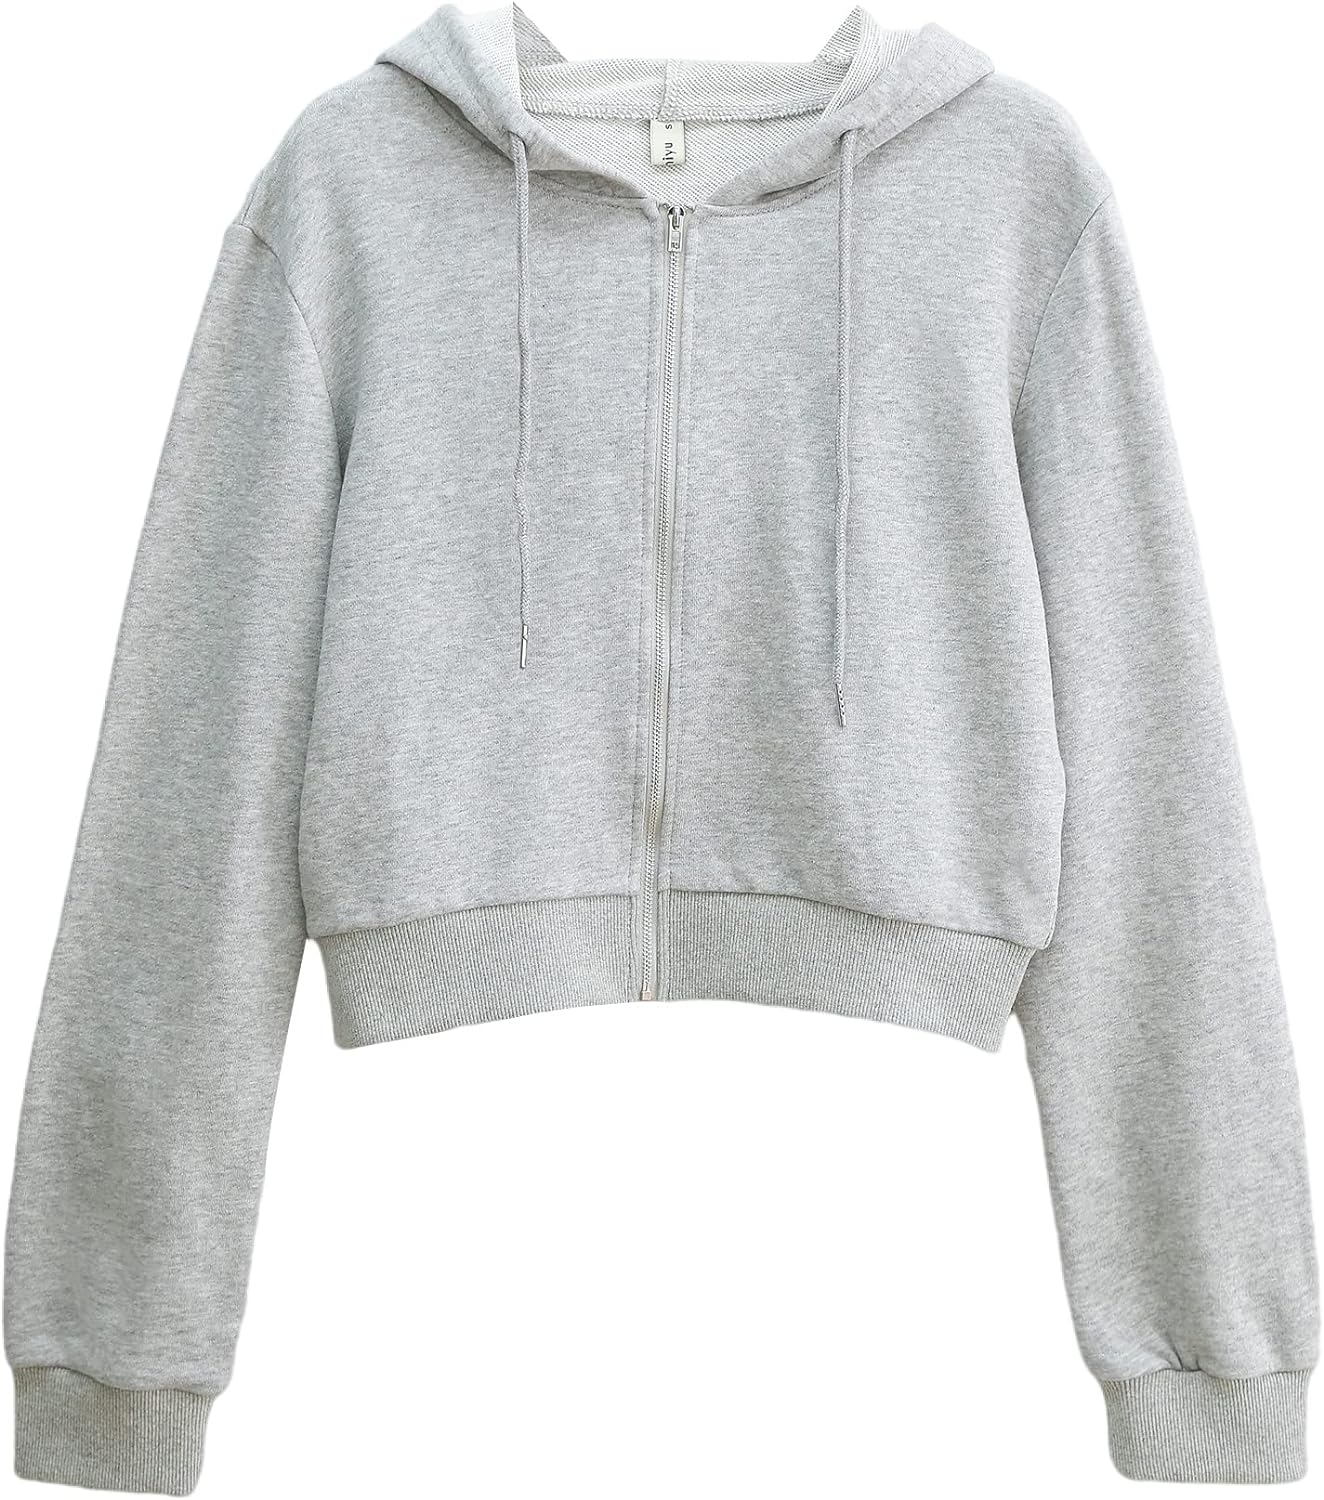 NTG Fad Light Heather Grey / XX-Large Women's Cropped Zip up Hoodie with Drawstring Hooded